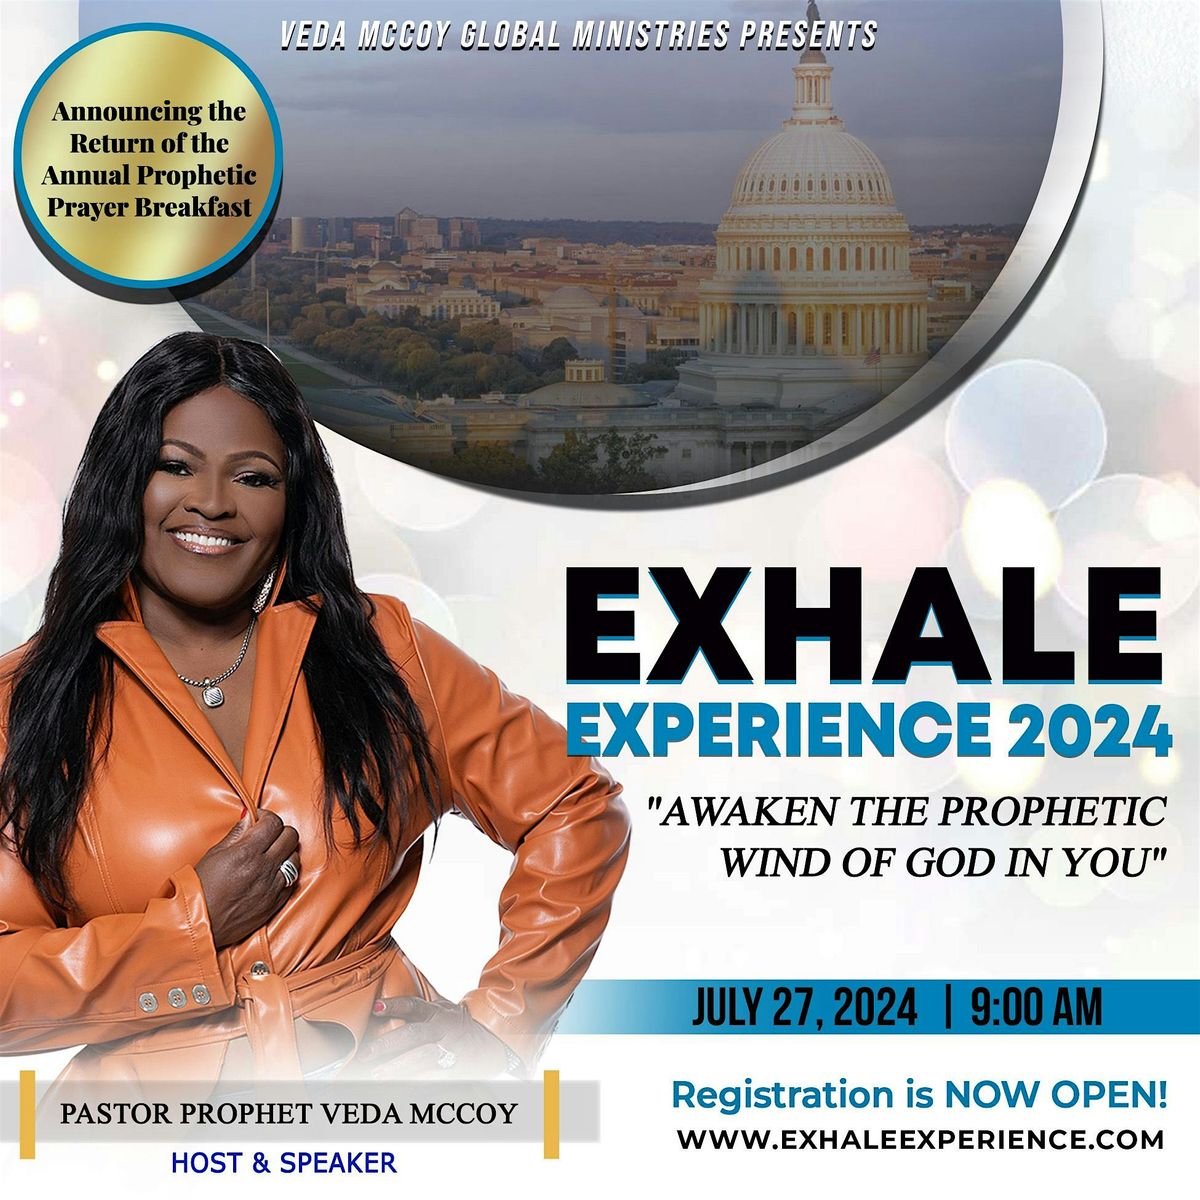 Annual Prophetic Prayer Breakfast Returns with EXHALE Experience 2024